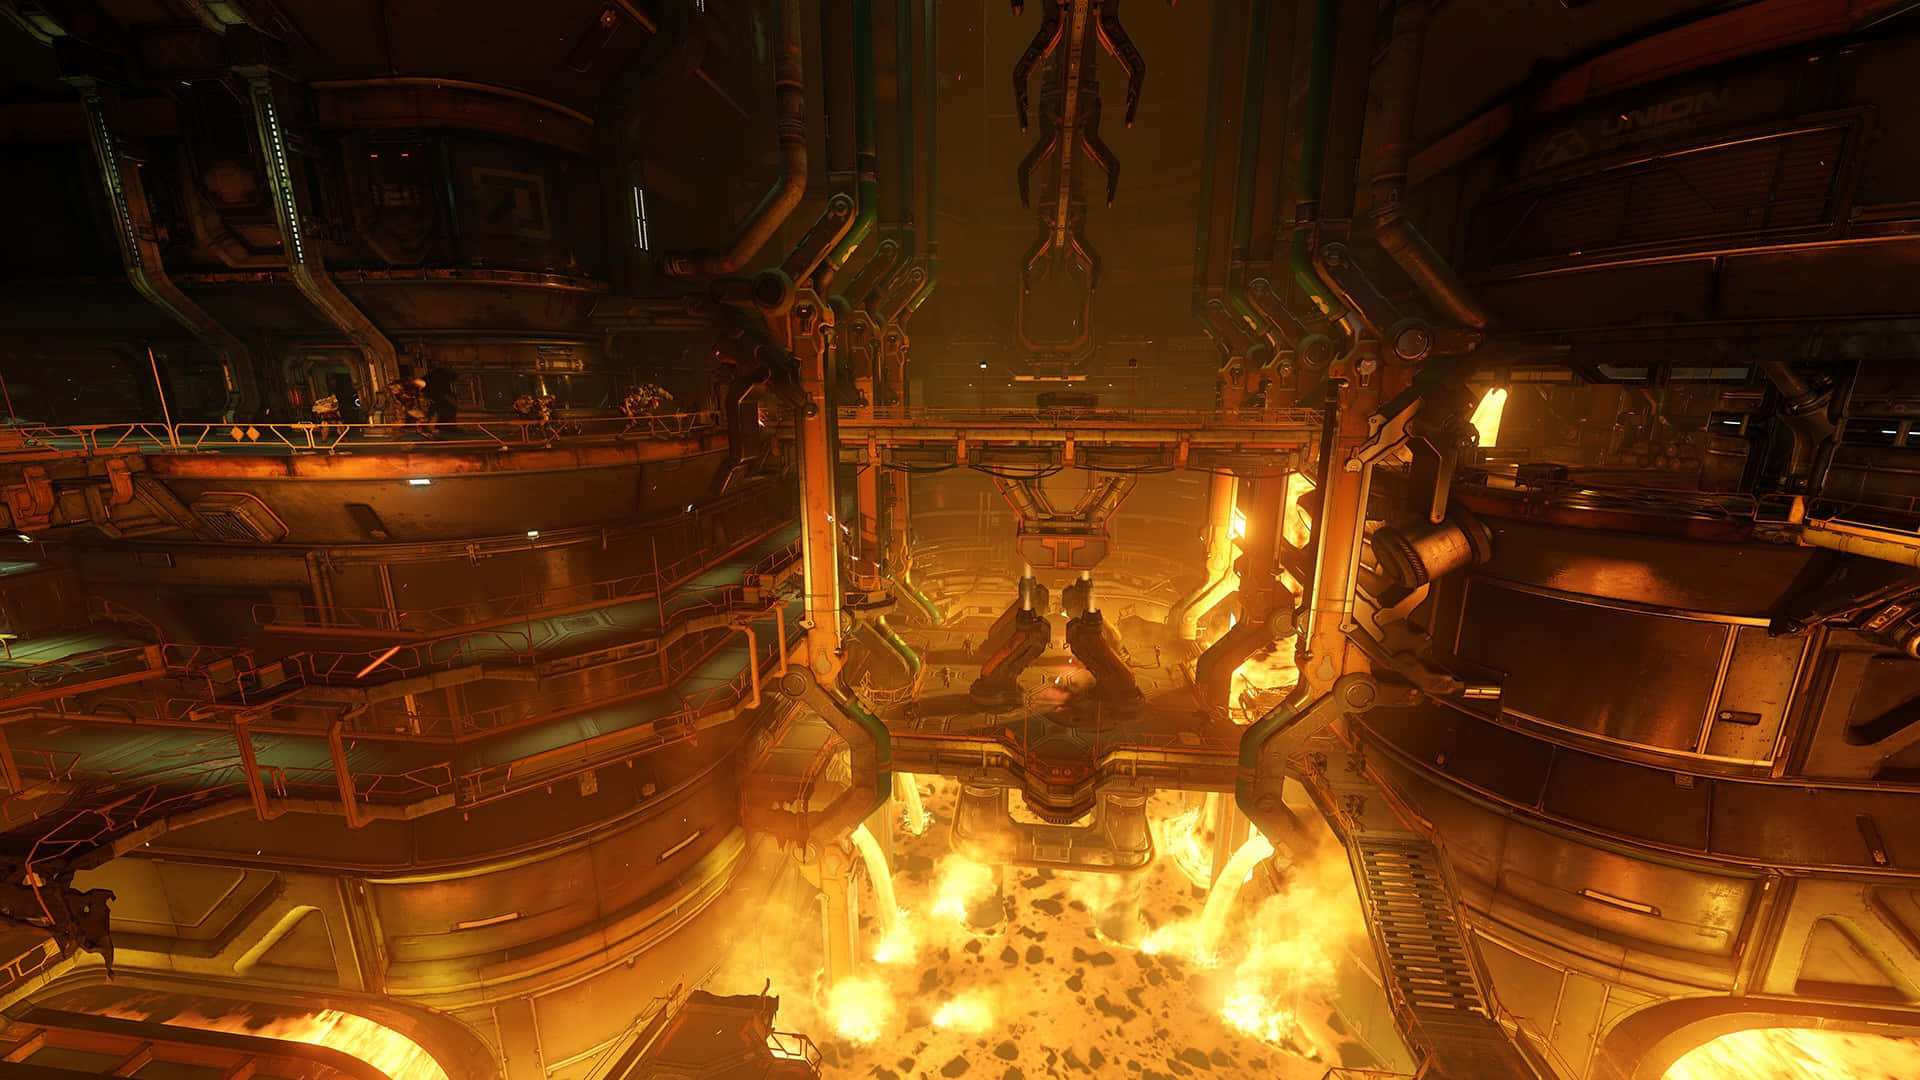 A Screenshot Of A Futuristic Building With Fire And Flames